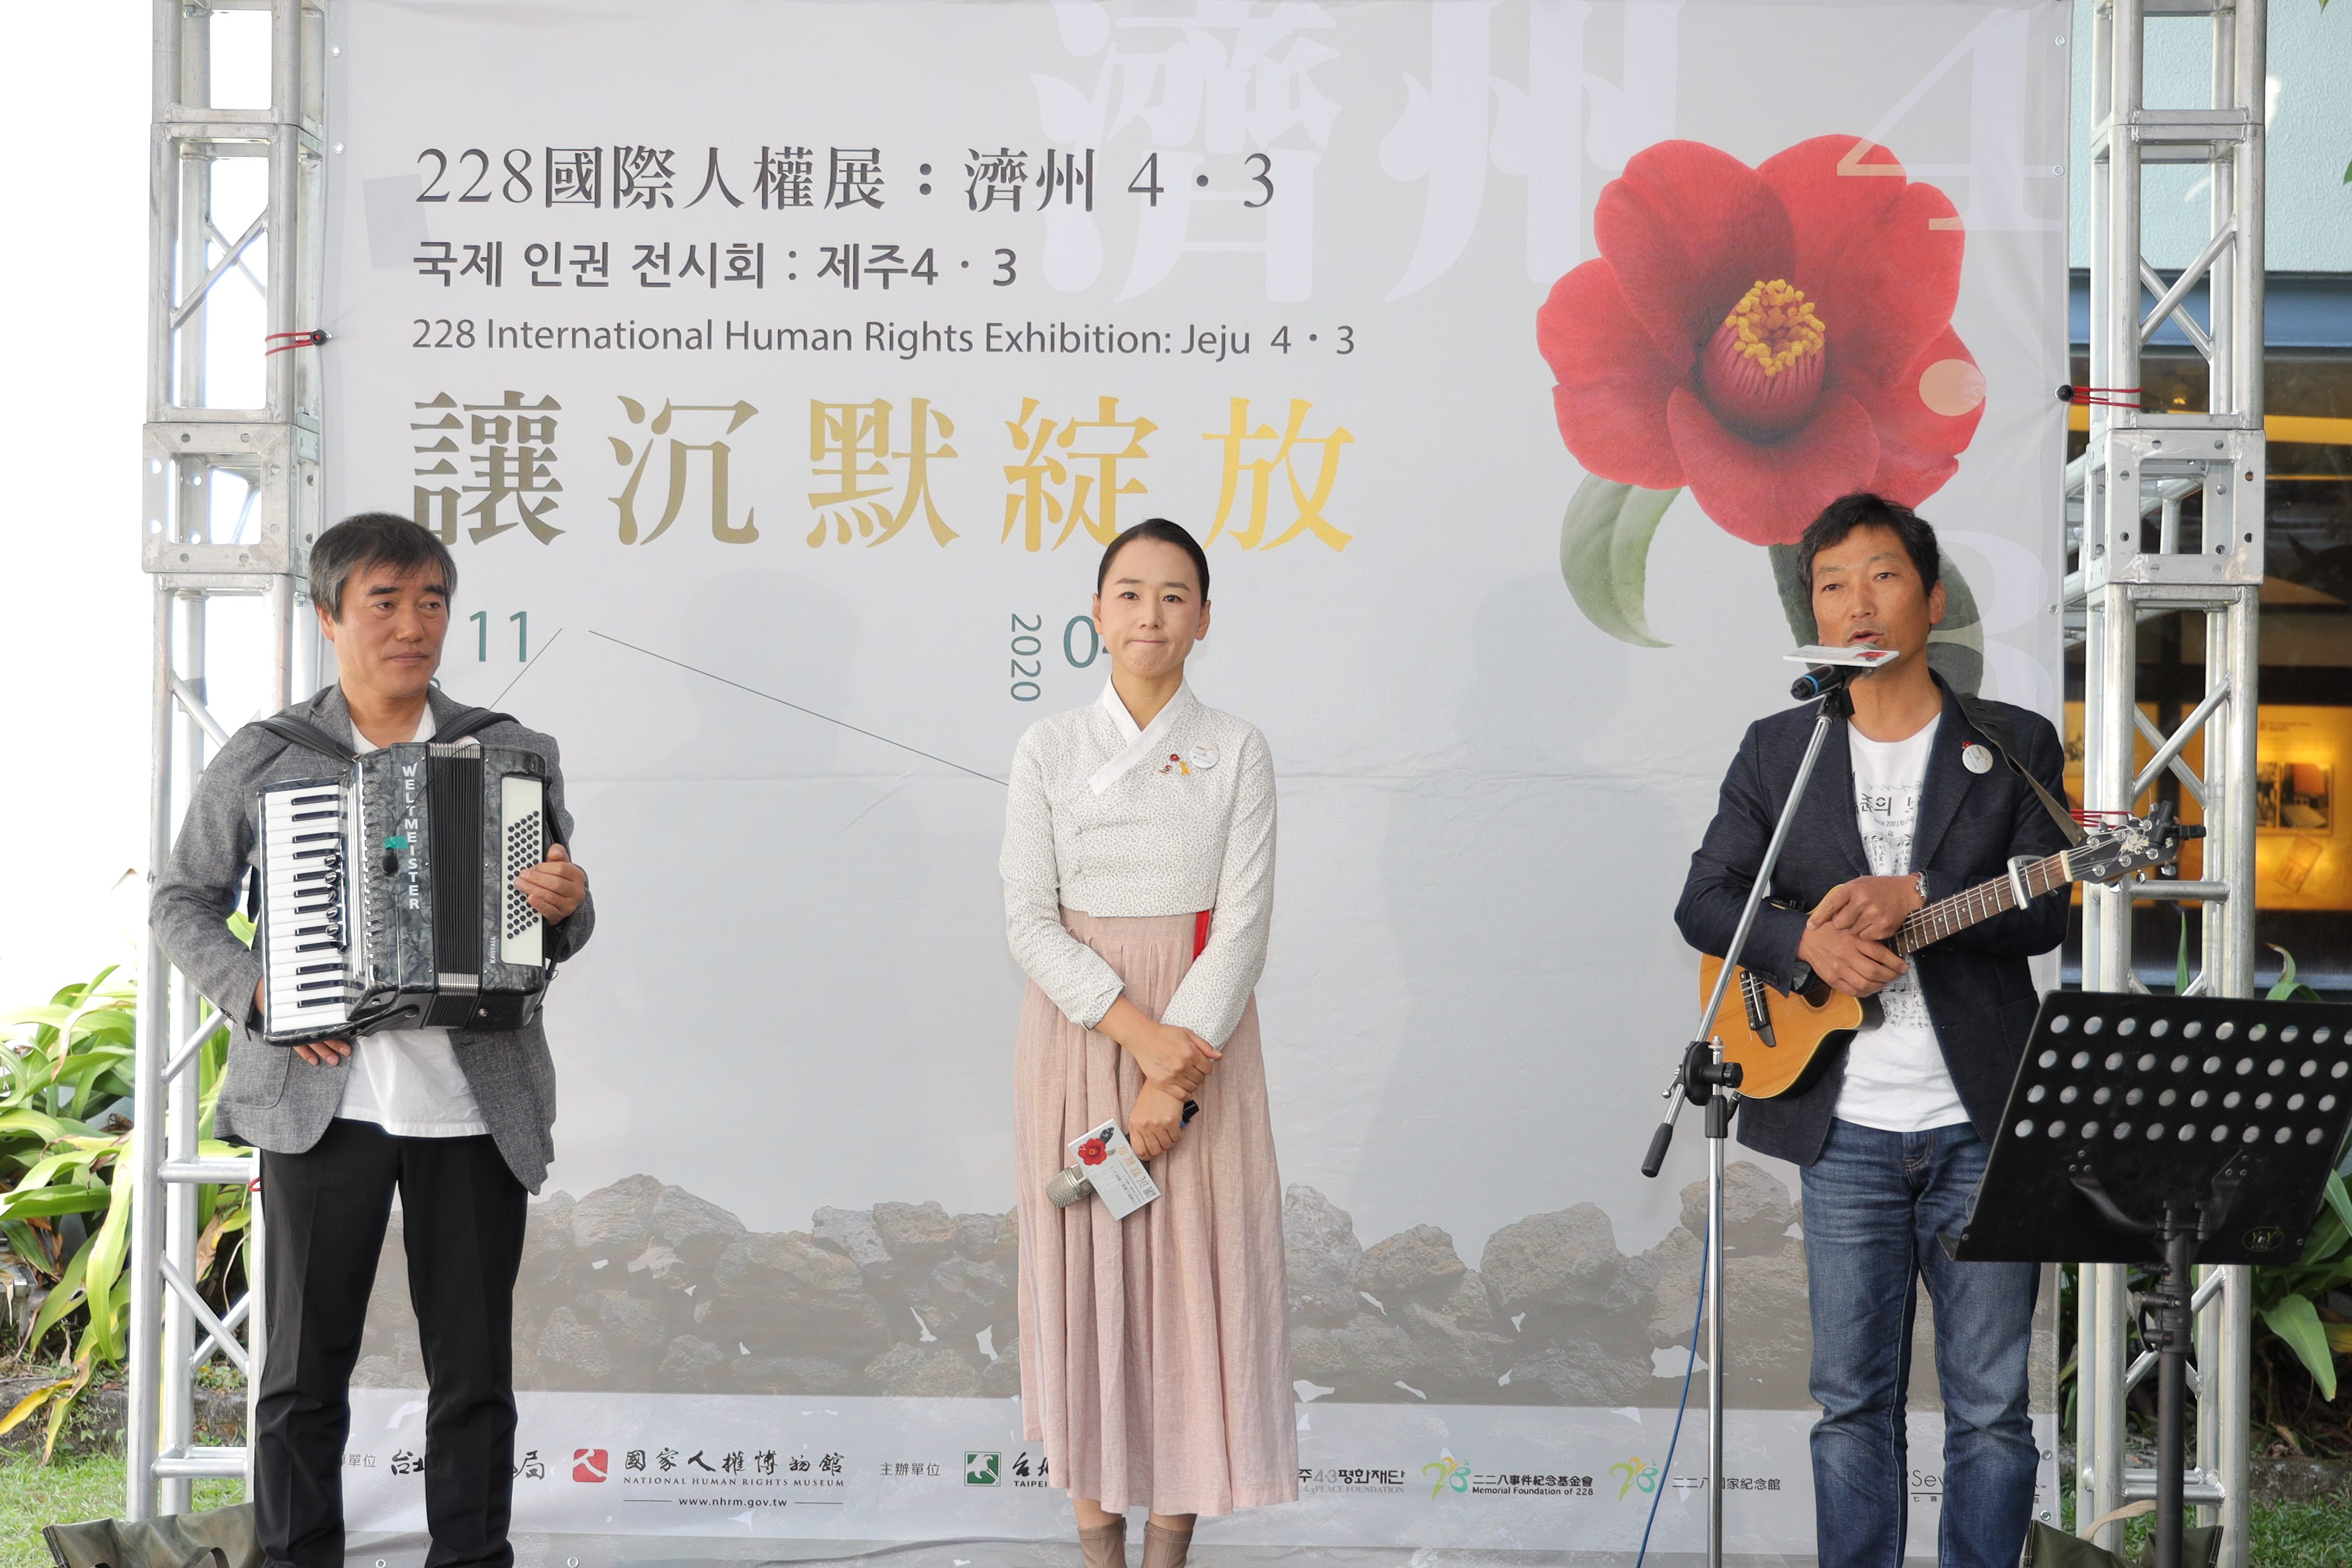 A famous band, Mountain Amusement Club, from Jeju performed at the opening.